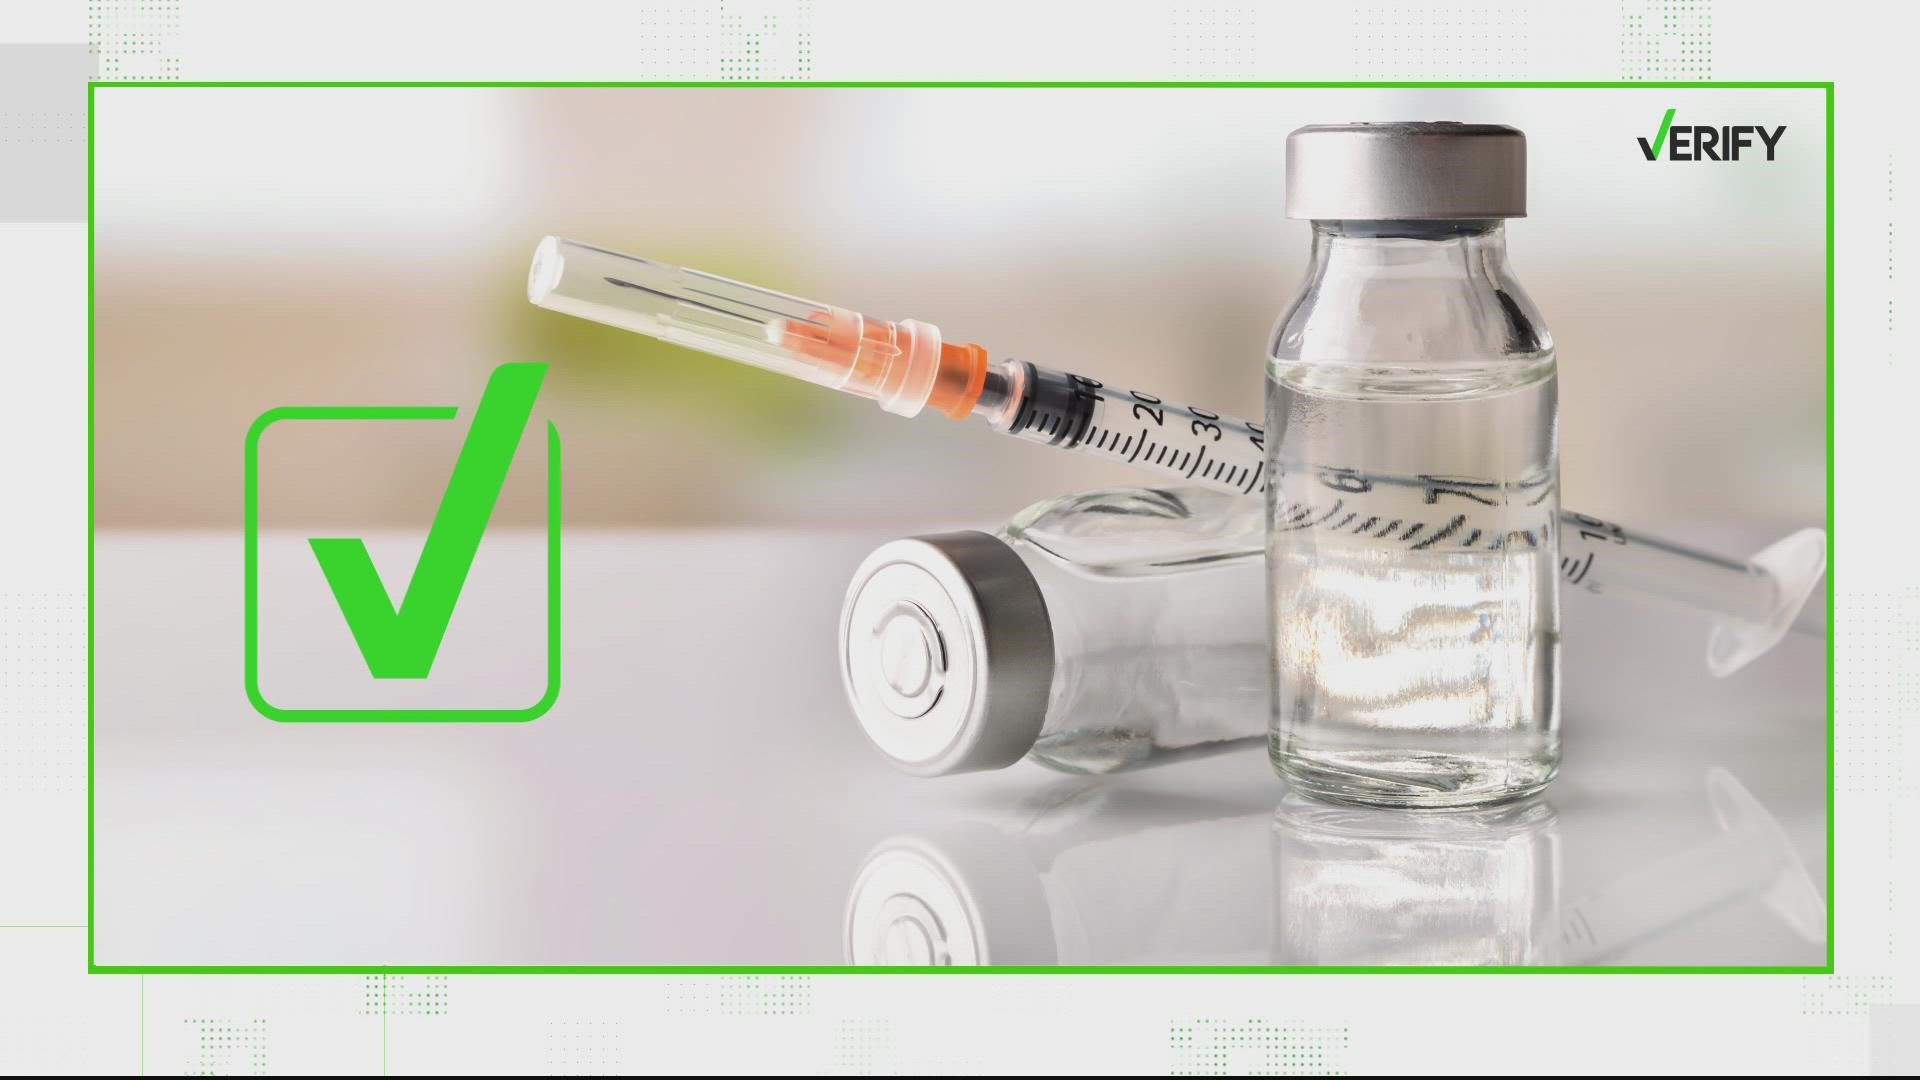 The list price for insulin has ballooned over the last two decades. Why is it so expensive?